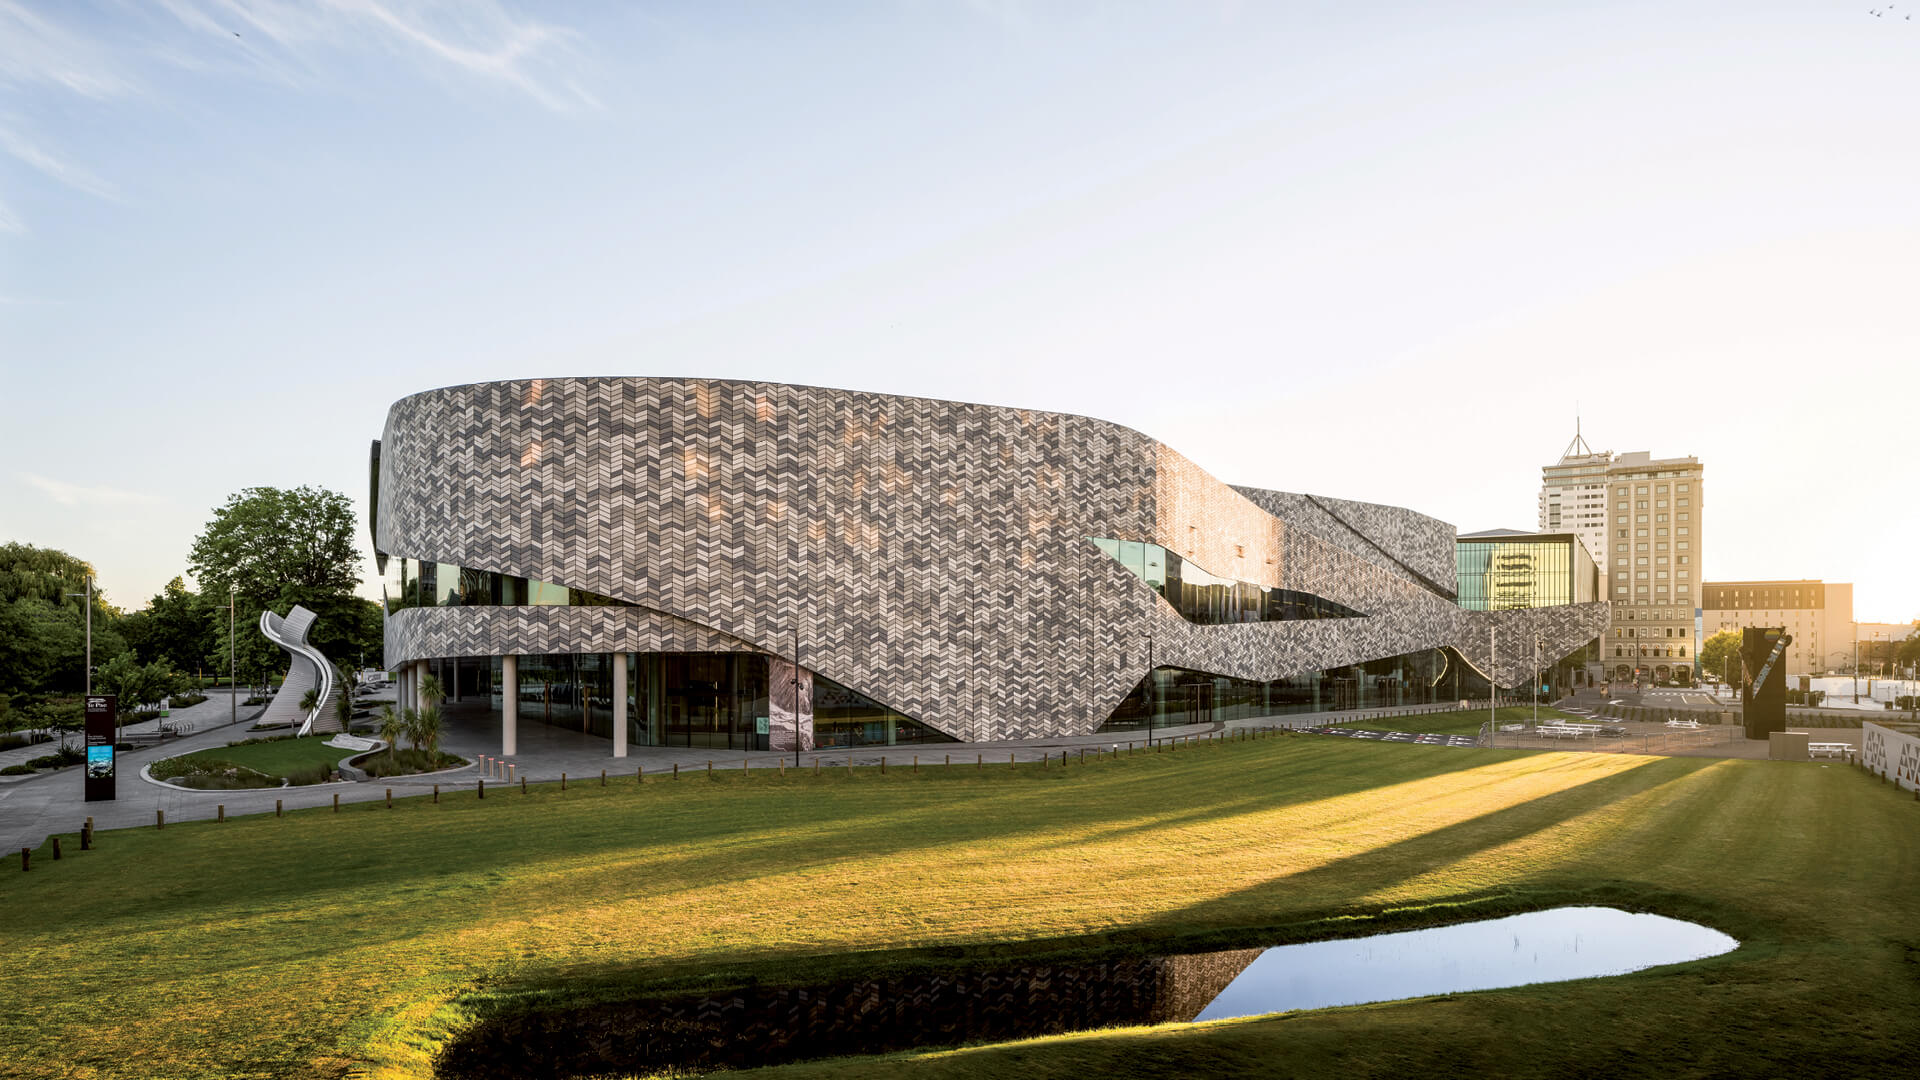 Te Pae Christchurch Convention and Exhibition Centre boasts a fluid tiled façade